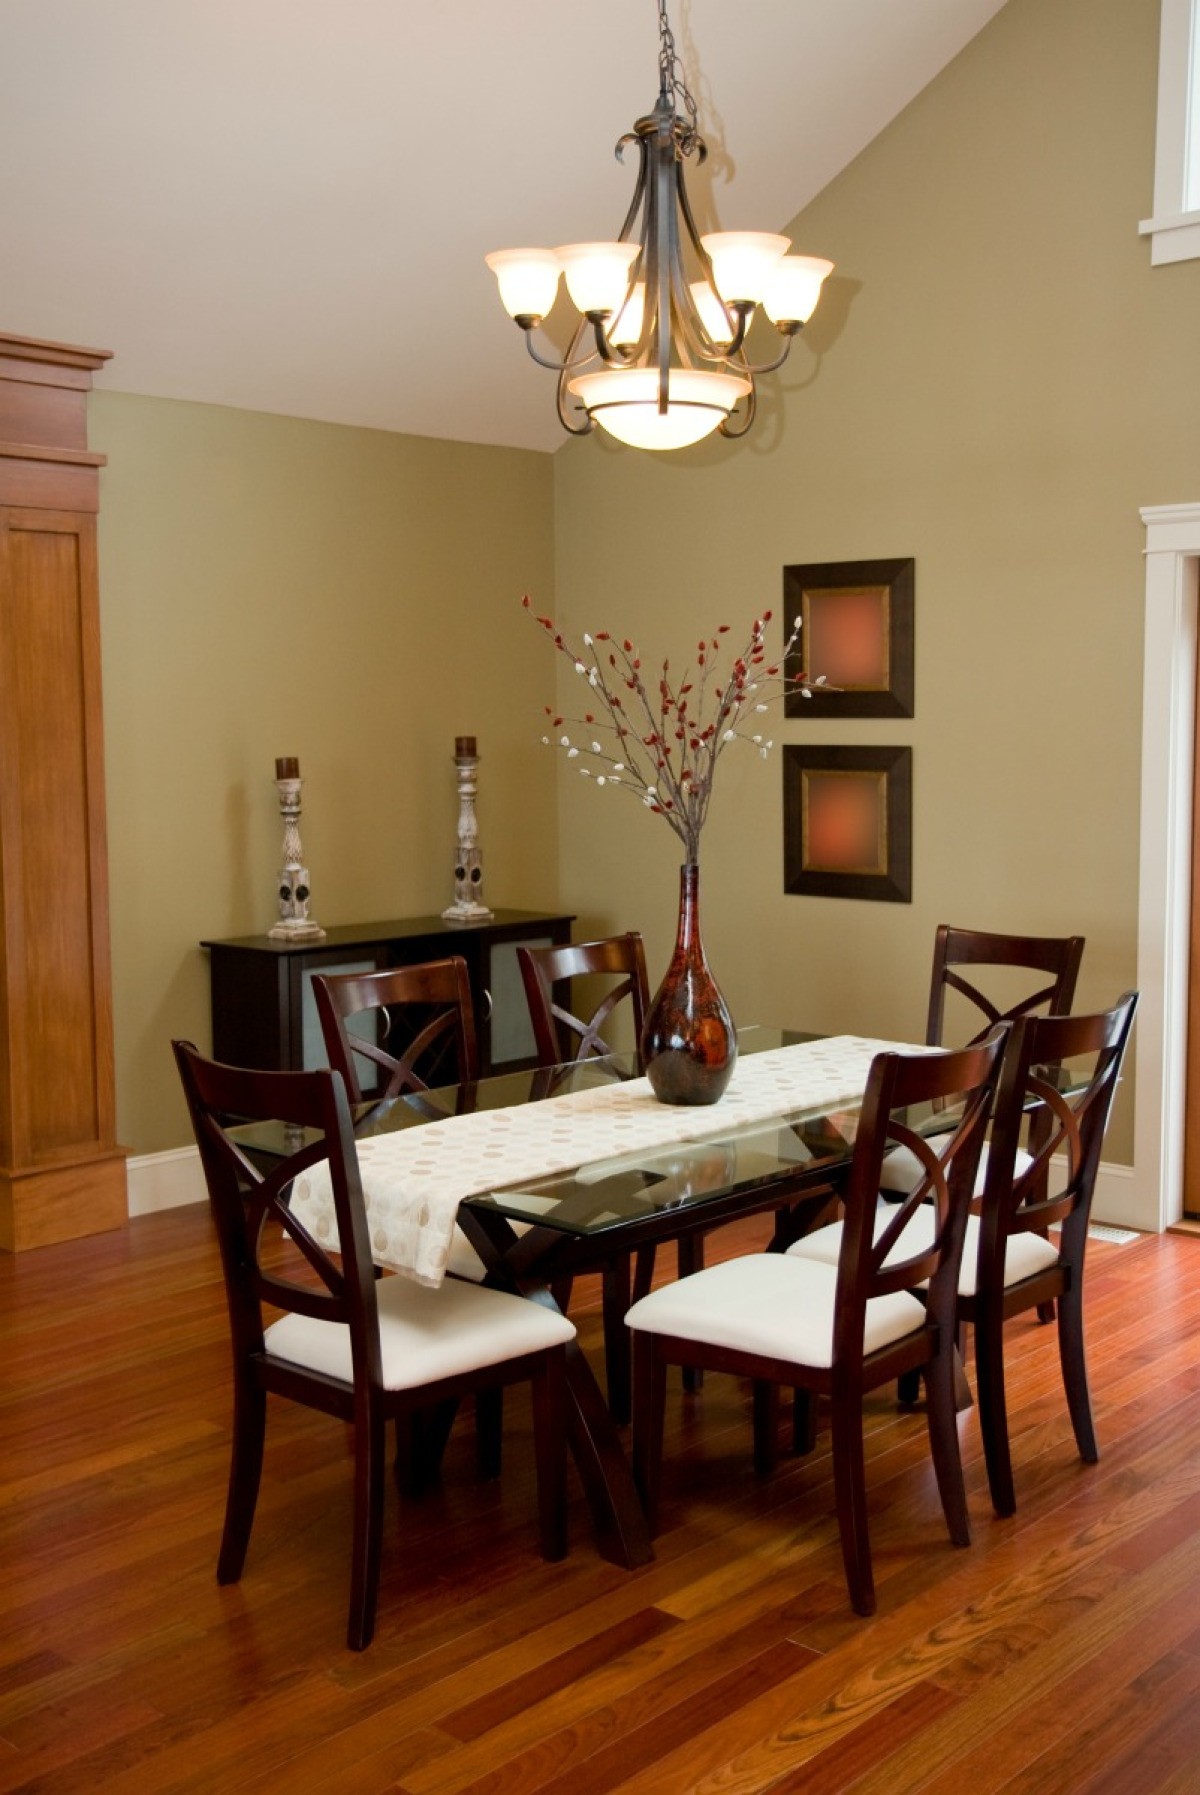 Living And Dining Room Paint Colors / Maplewood trail. paint color # 2